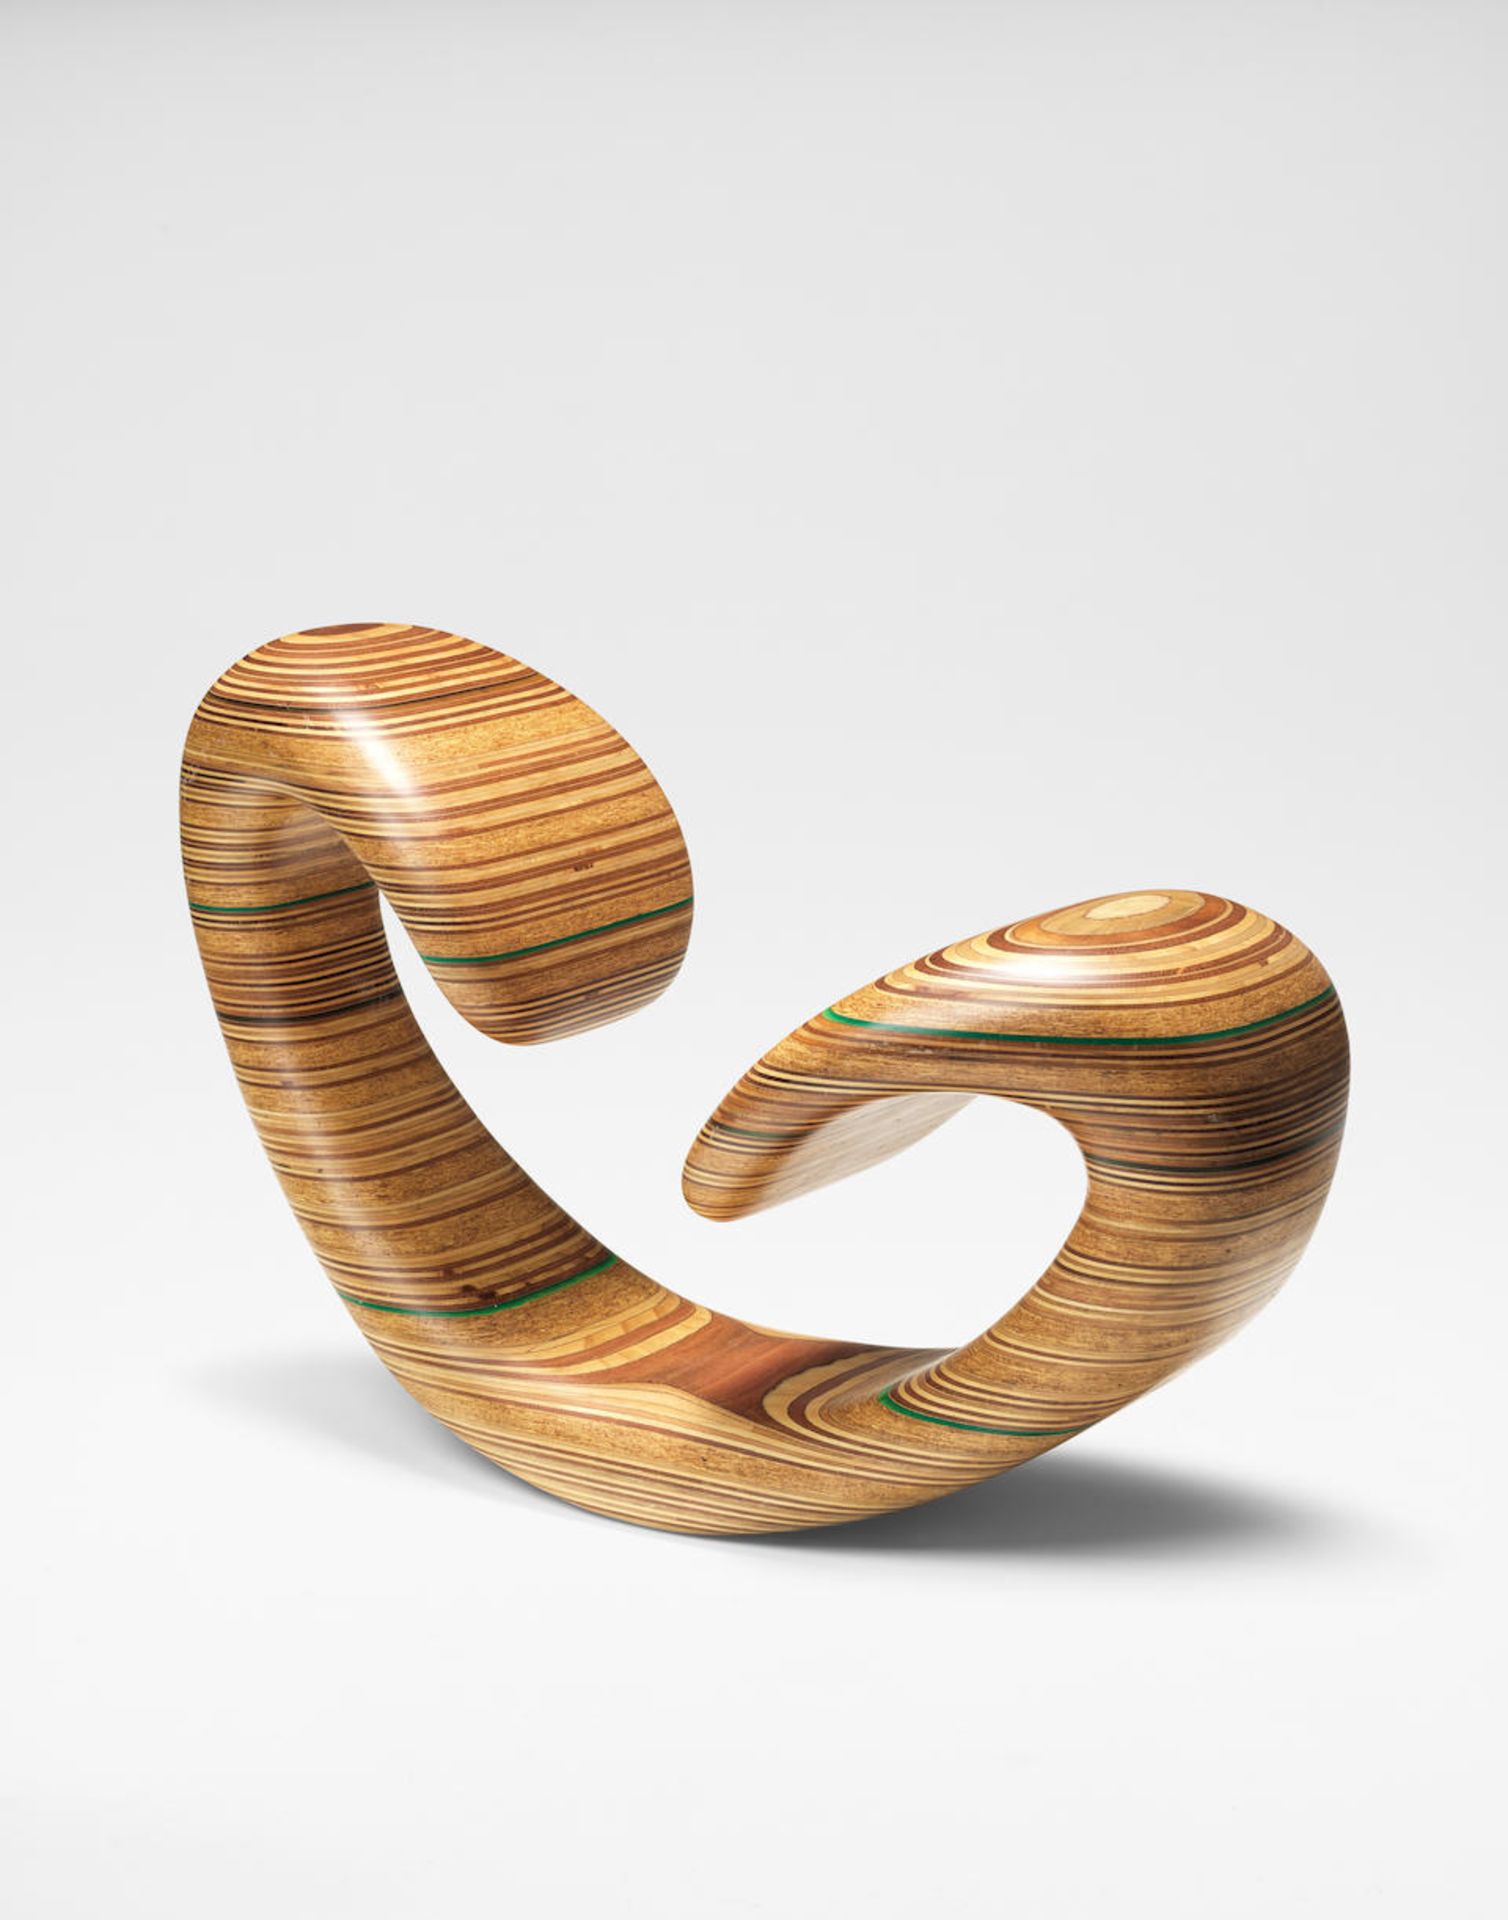 Pascal Dowers and Chris Wilson 'Wave' chair, 2012